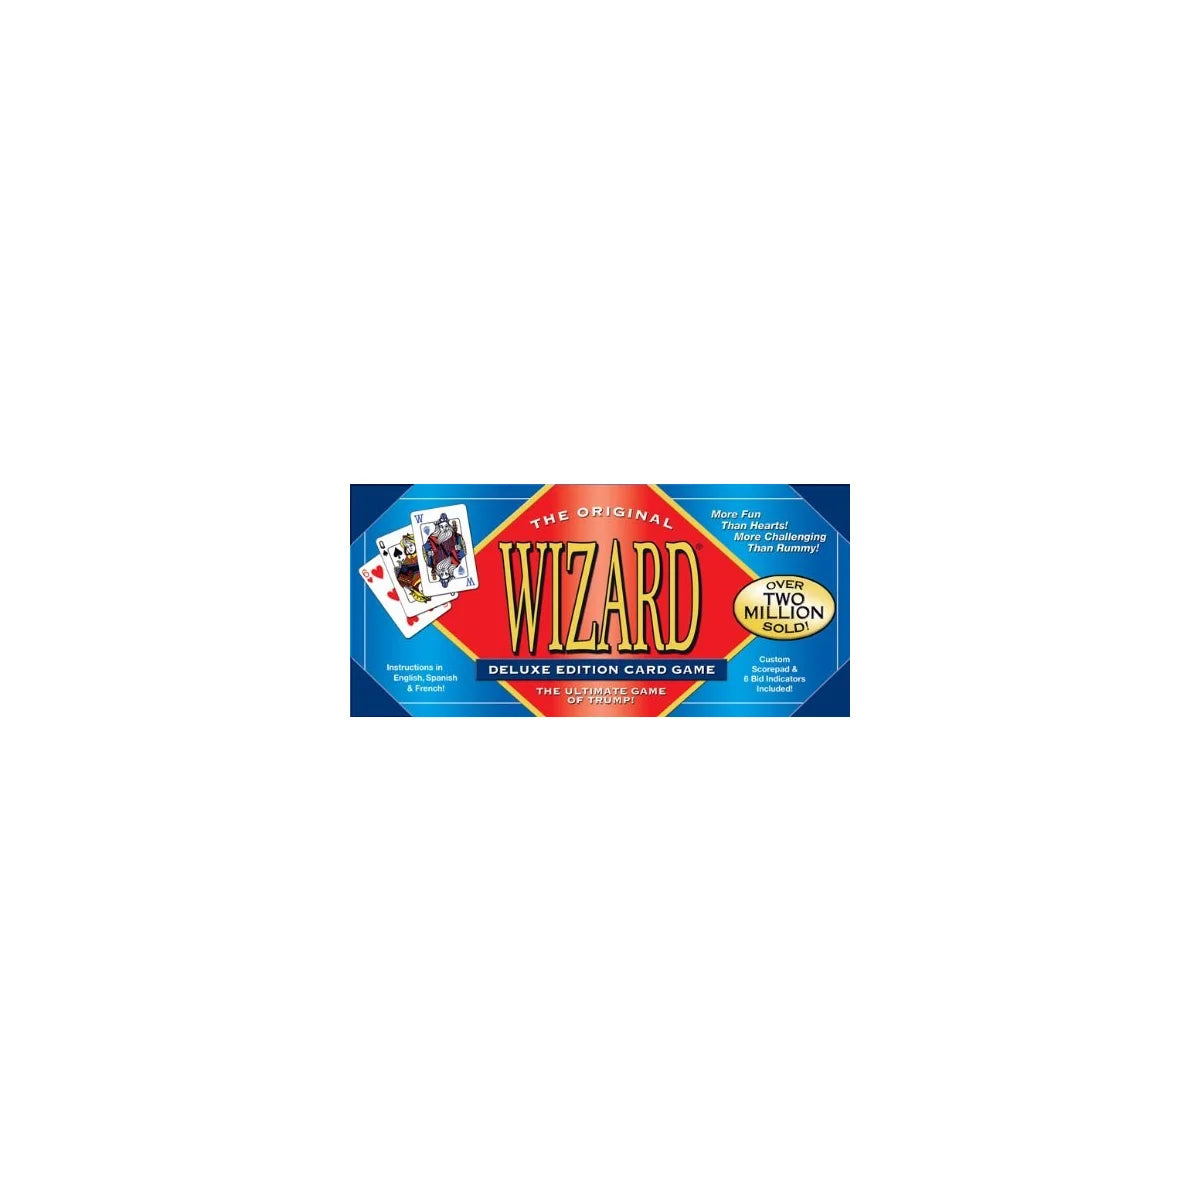 WIZARD DELUXE CARD GAME SET